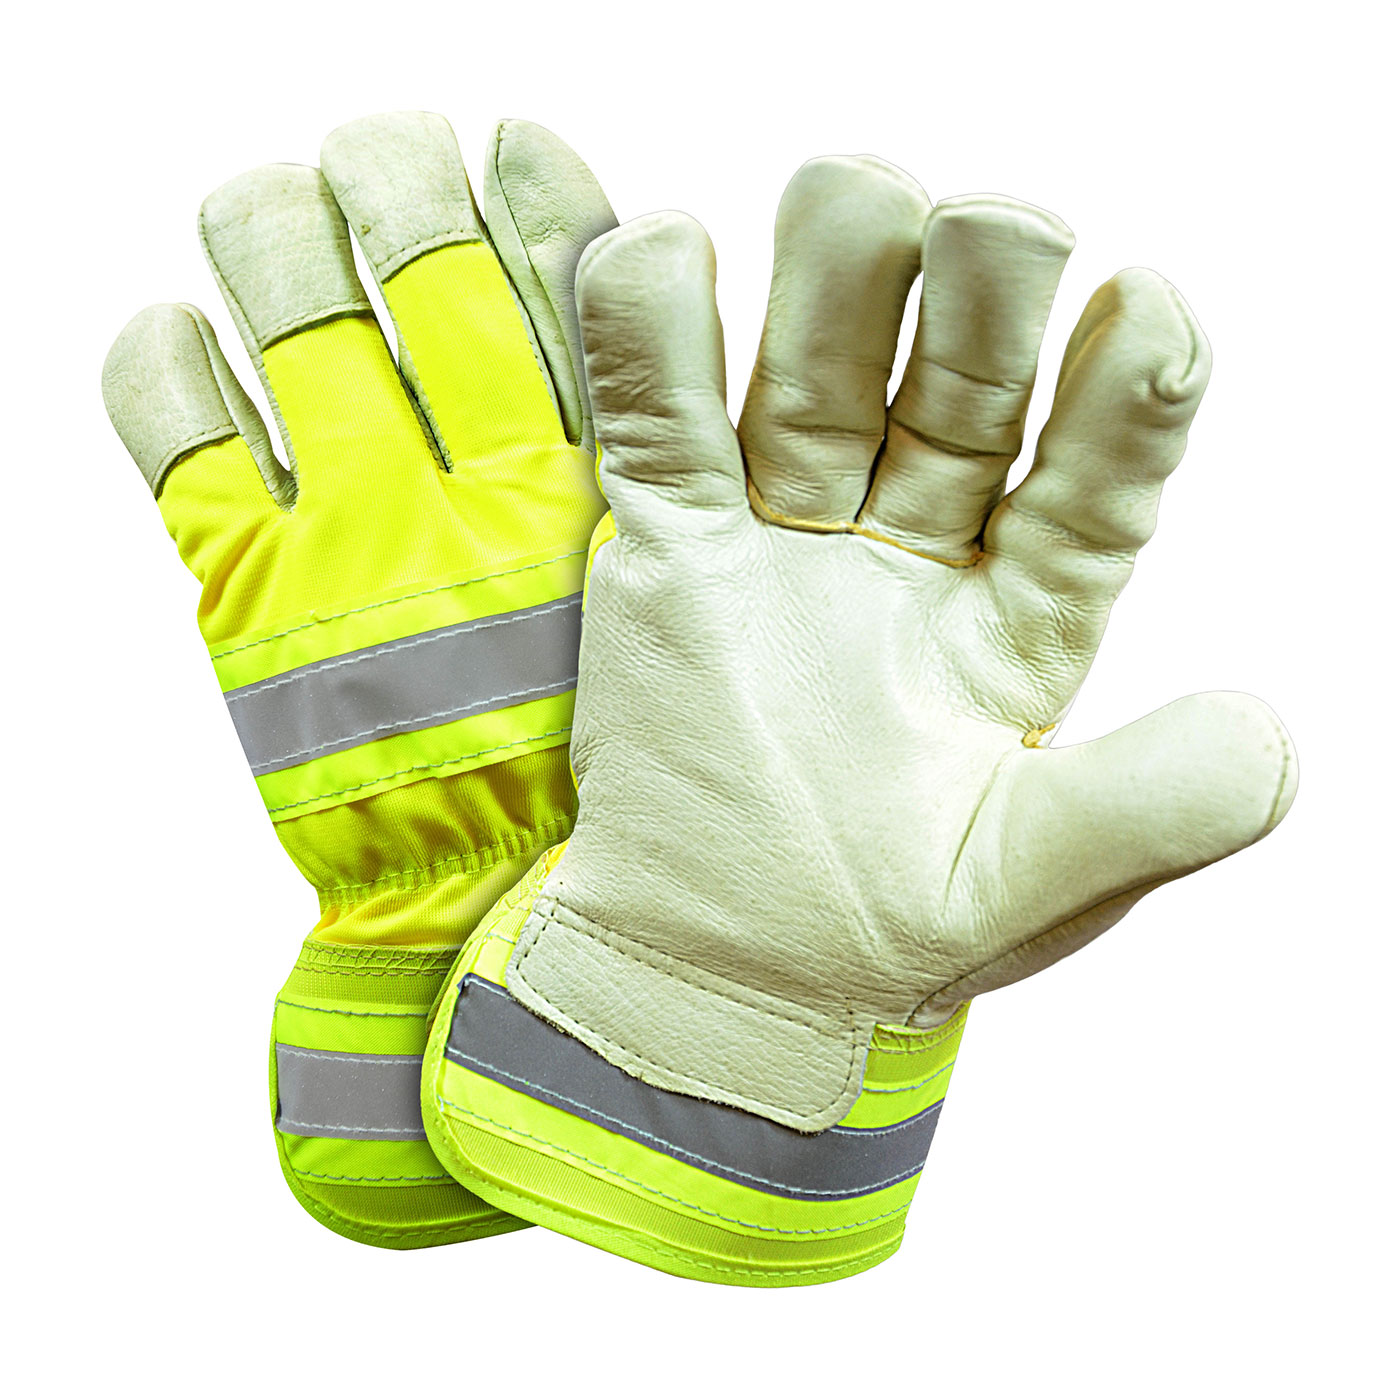 #HVY5555 PIP® WPosi-Therm Top Grain Pigskin Leather Palm Glove with Rubberized Safety Cuffs, Hi-Vis Nylon Backs and Retro Reflective Stripes